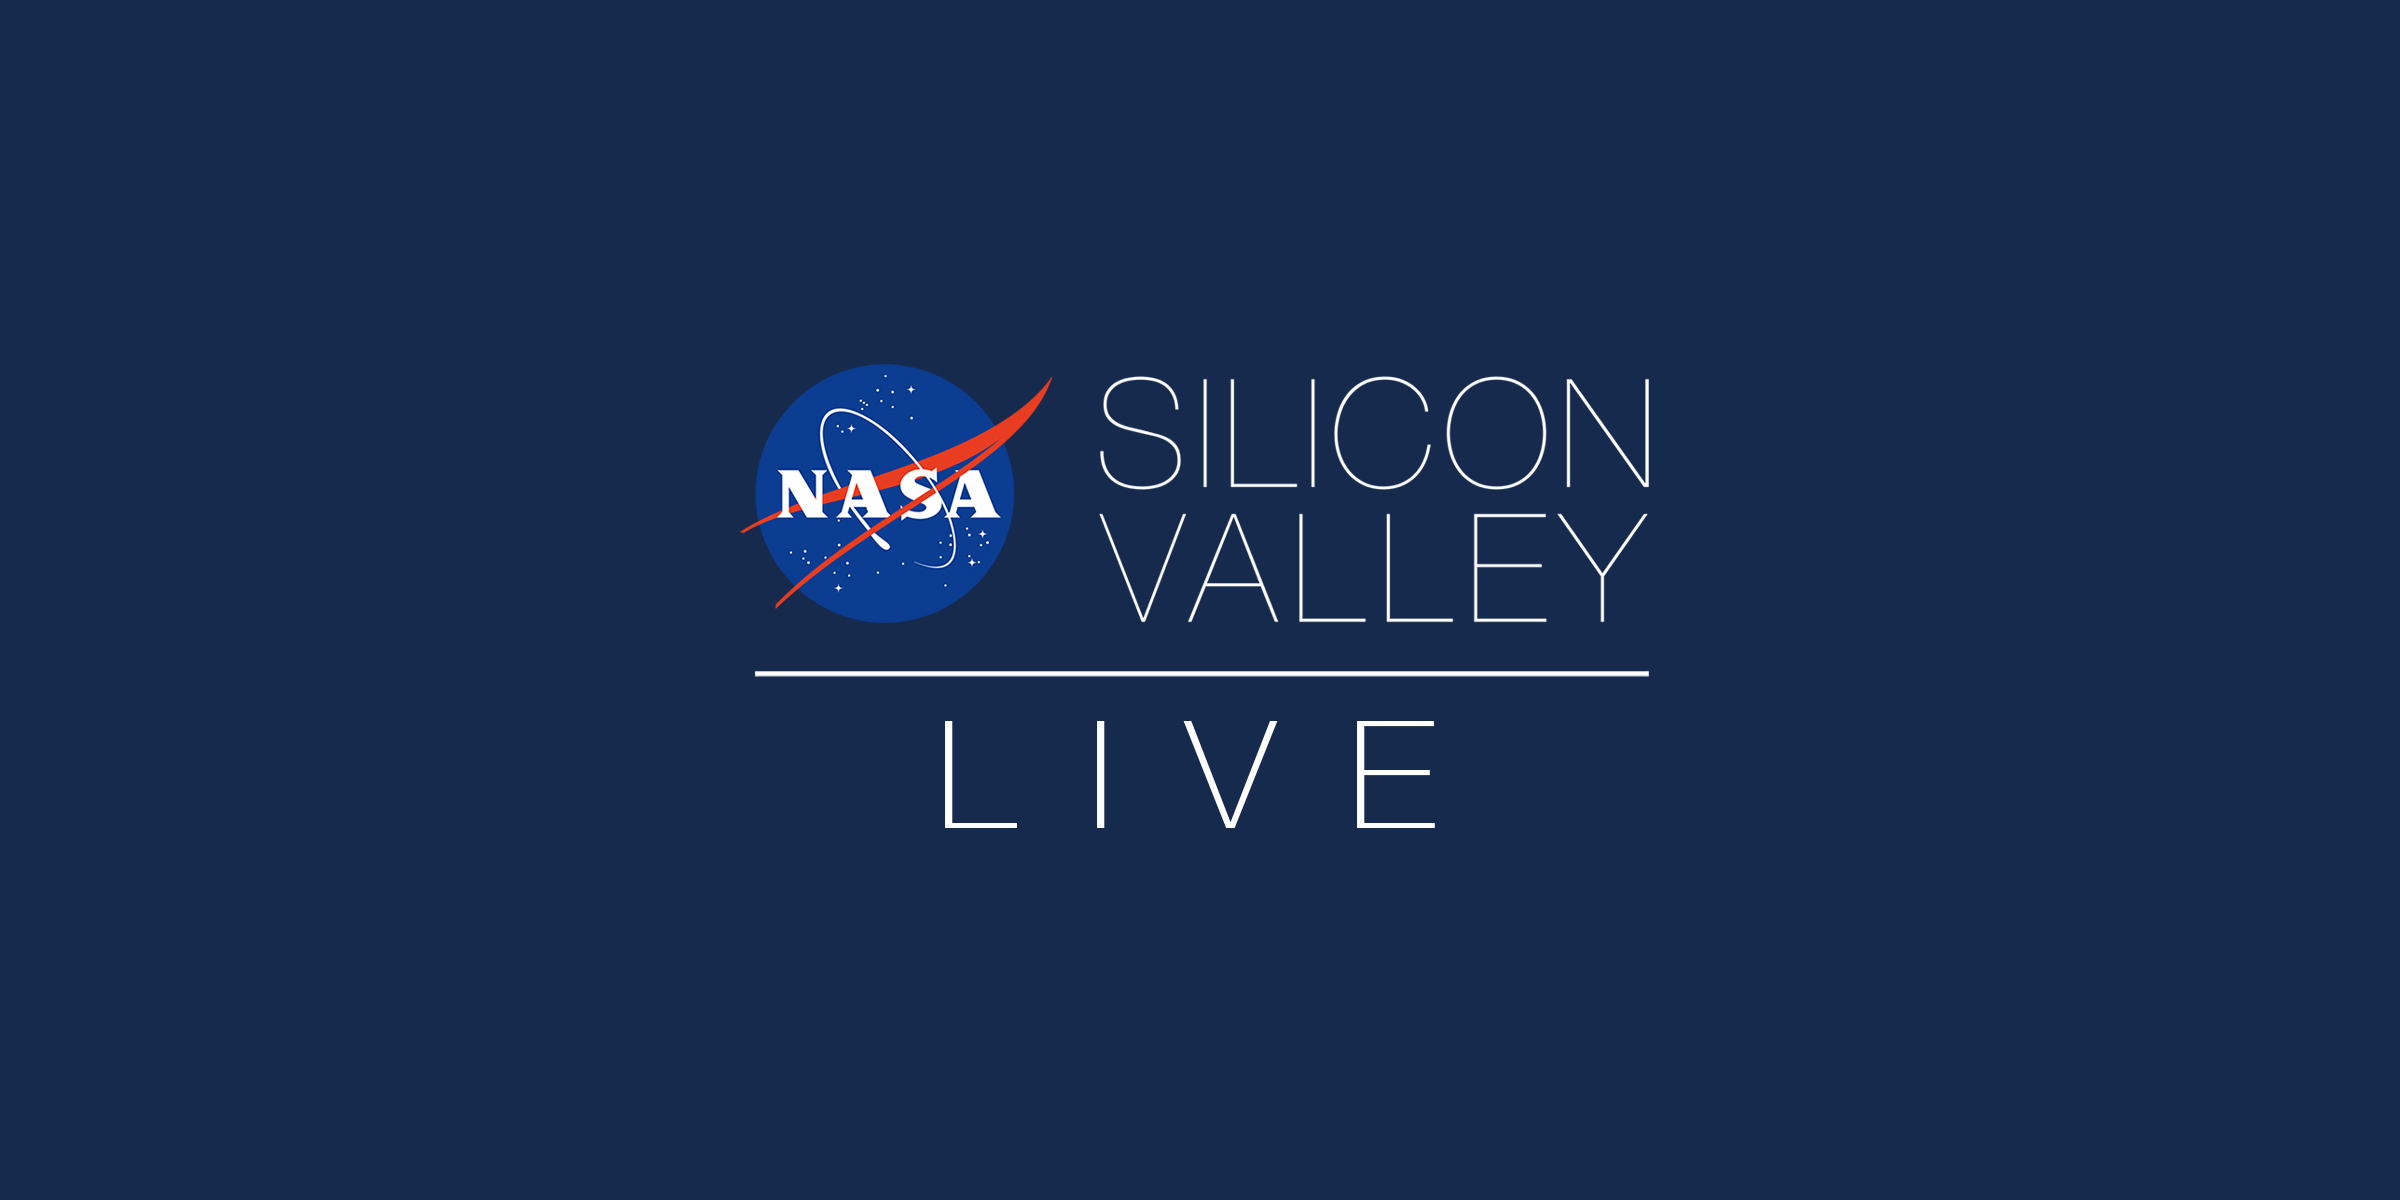 NASA in Silicon Valley Live – Halloween Costume and Cosplay Contest